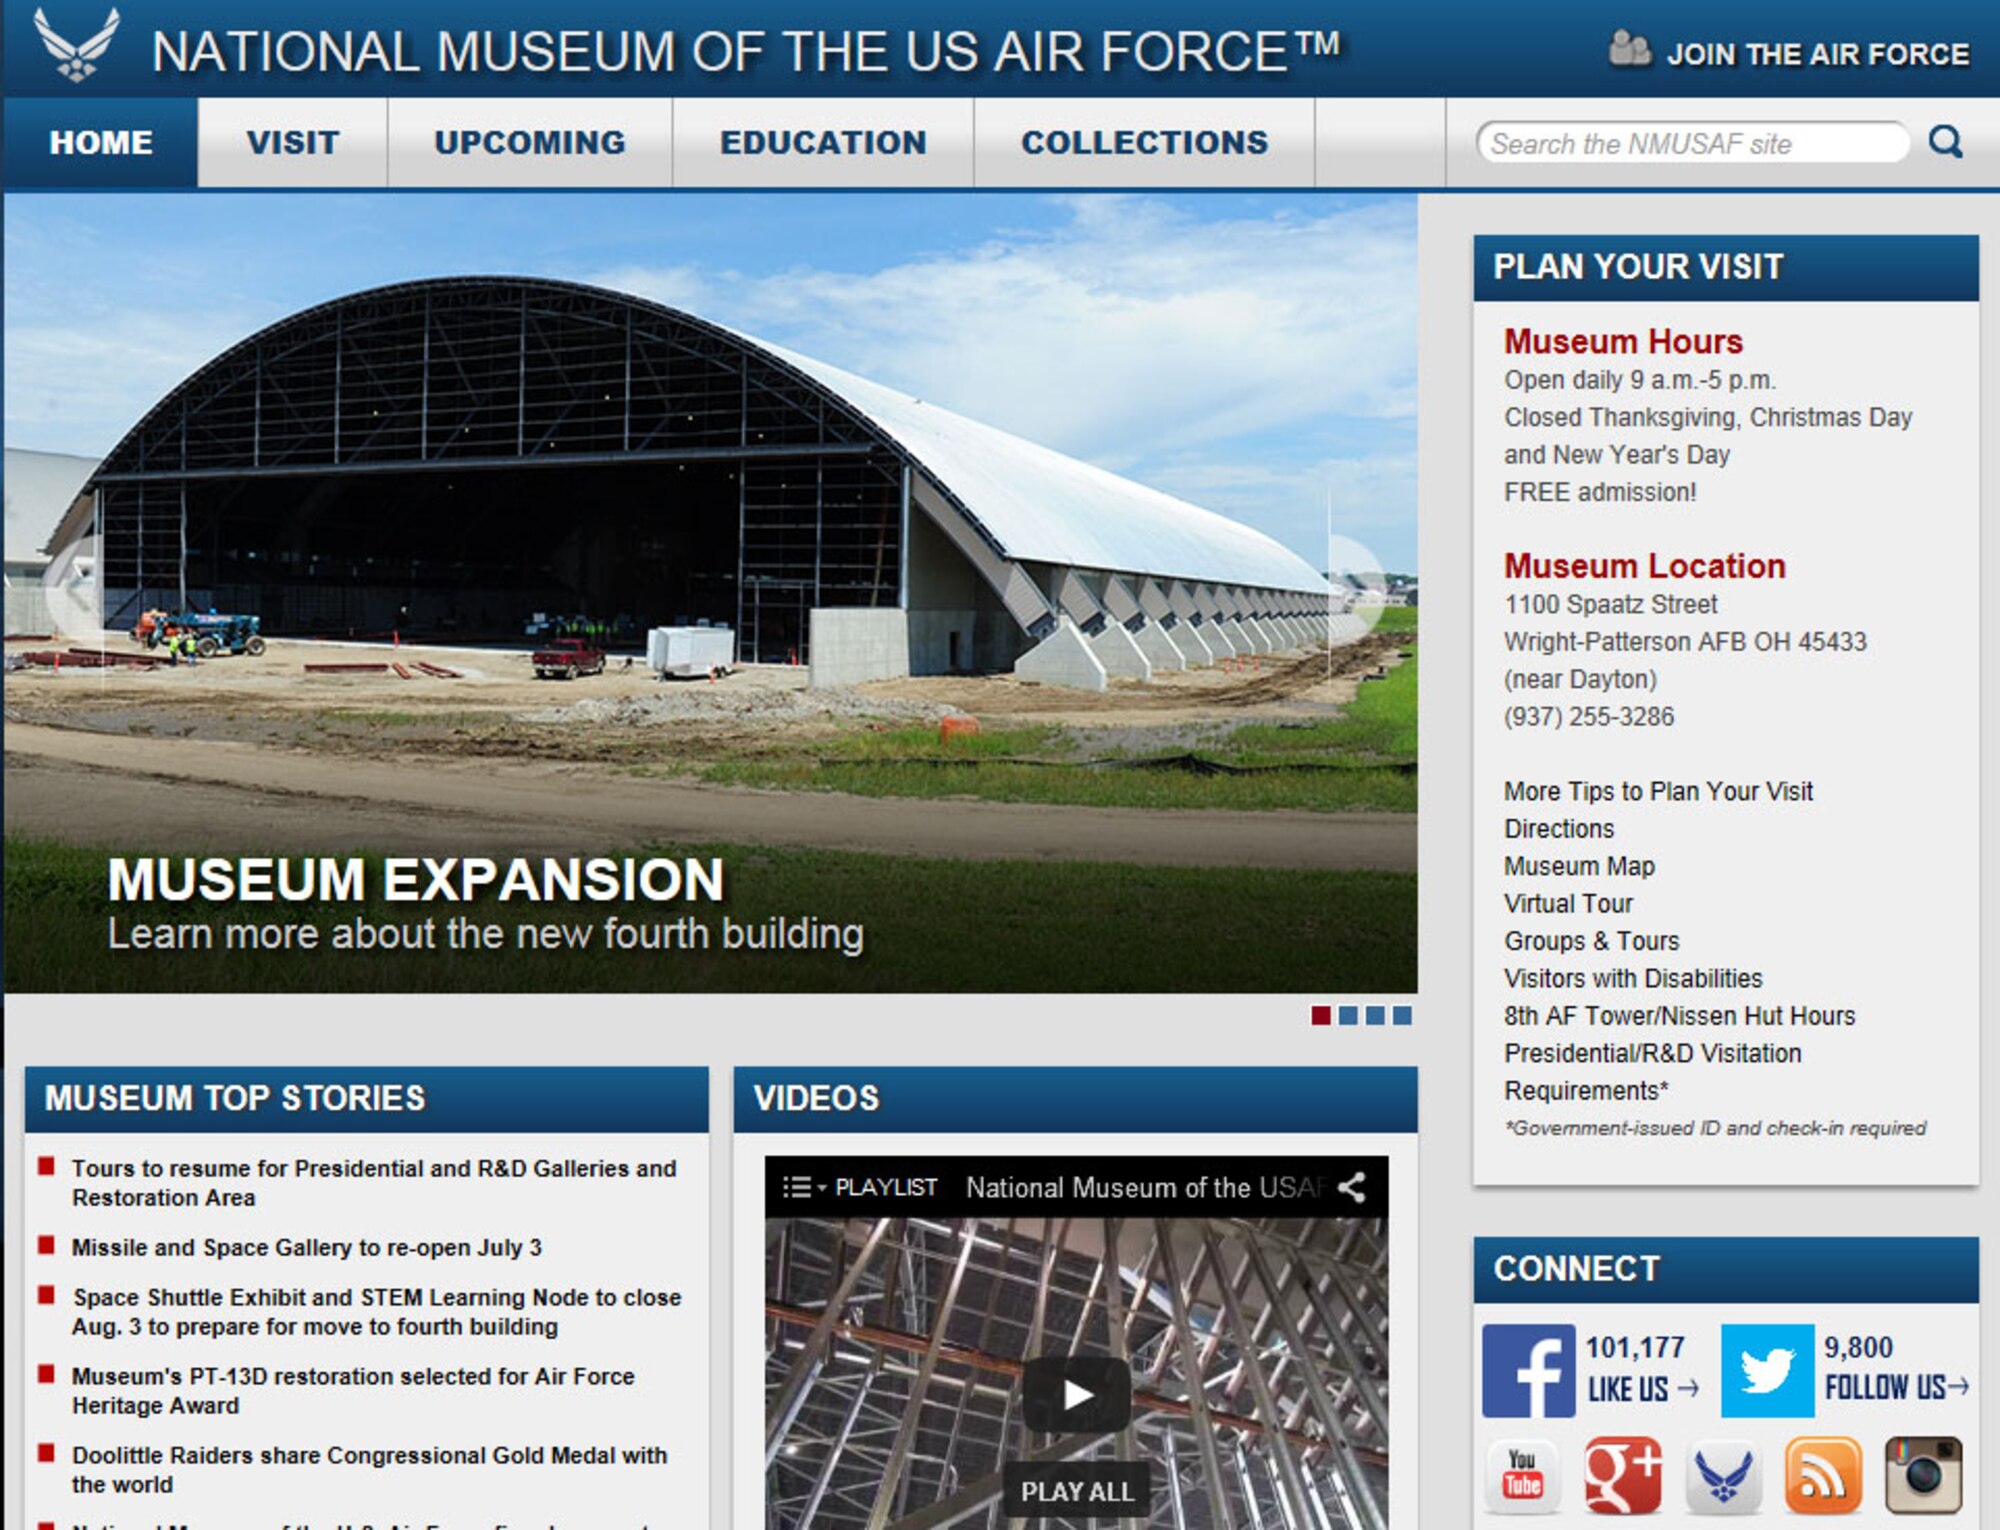 The National Museum of the U.S. Air Force website gives virtual visitors access to information and photos from the museum's exhibits, from the earliest days of military aviation through today's war on terror. Along with larger photos and videos, the new site is optimized for mobile devices.